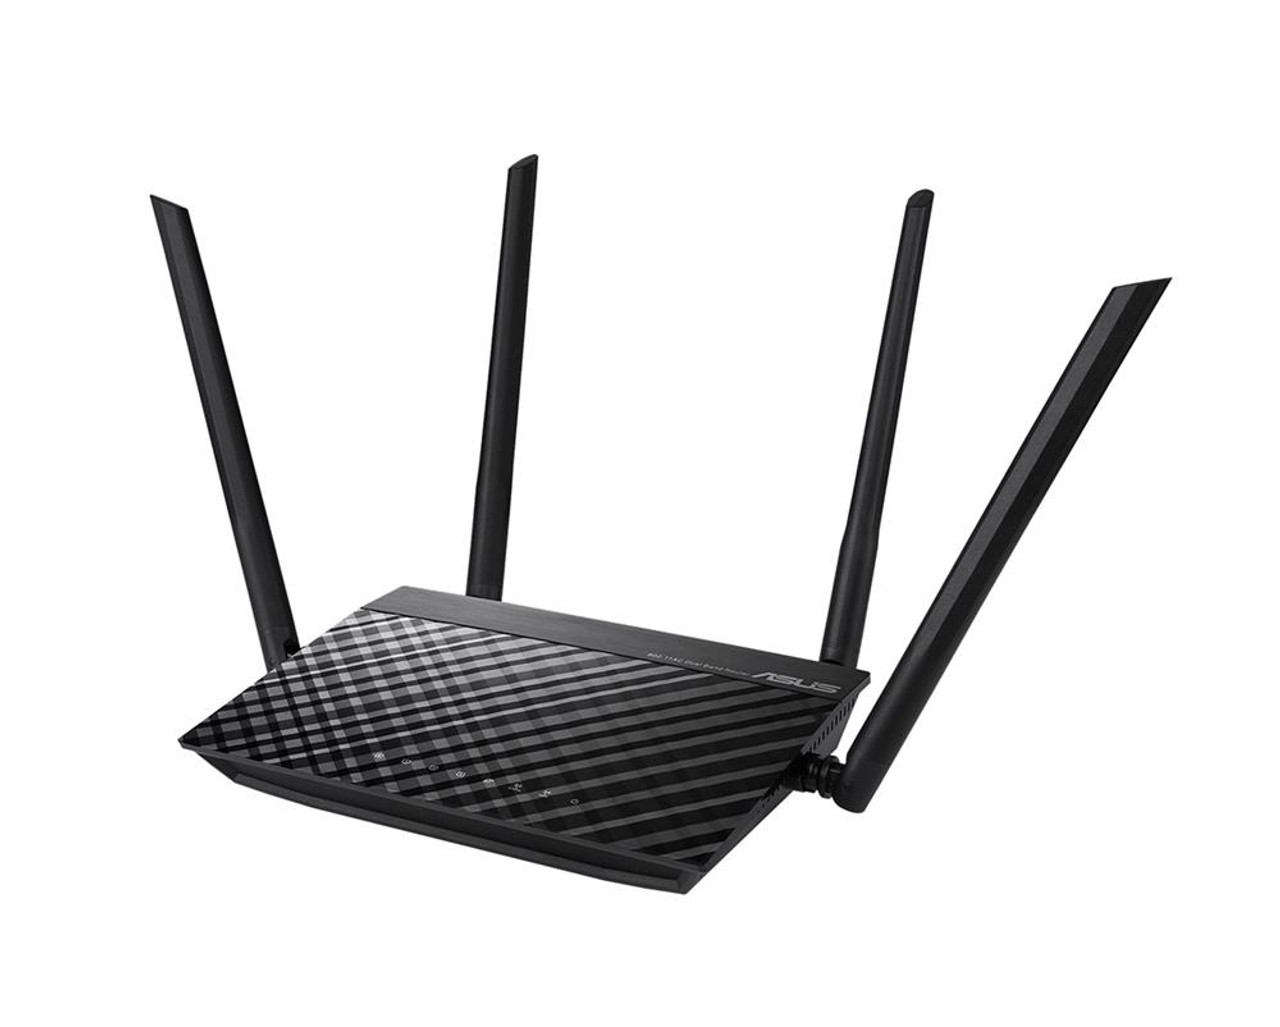 RT-AC51 ASUS Wireless AC750 Dual-band Router (Refurbished)